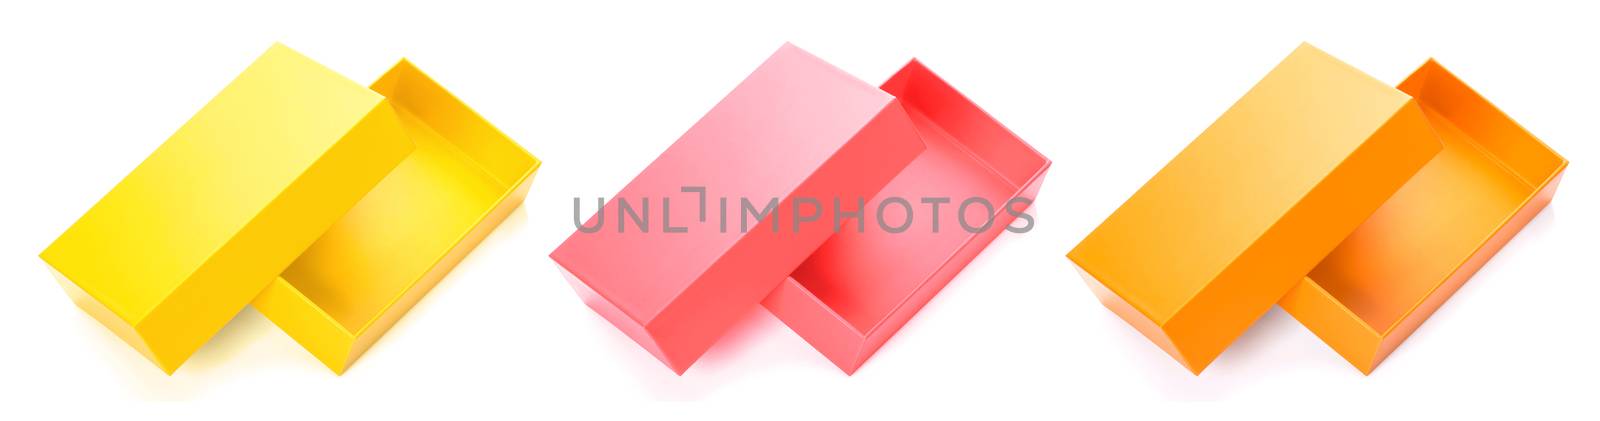 Color cardboard box mock up isolated on white background by xamtiw